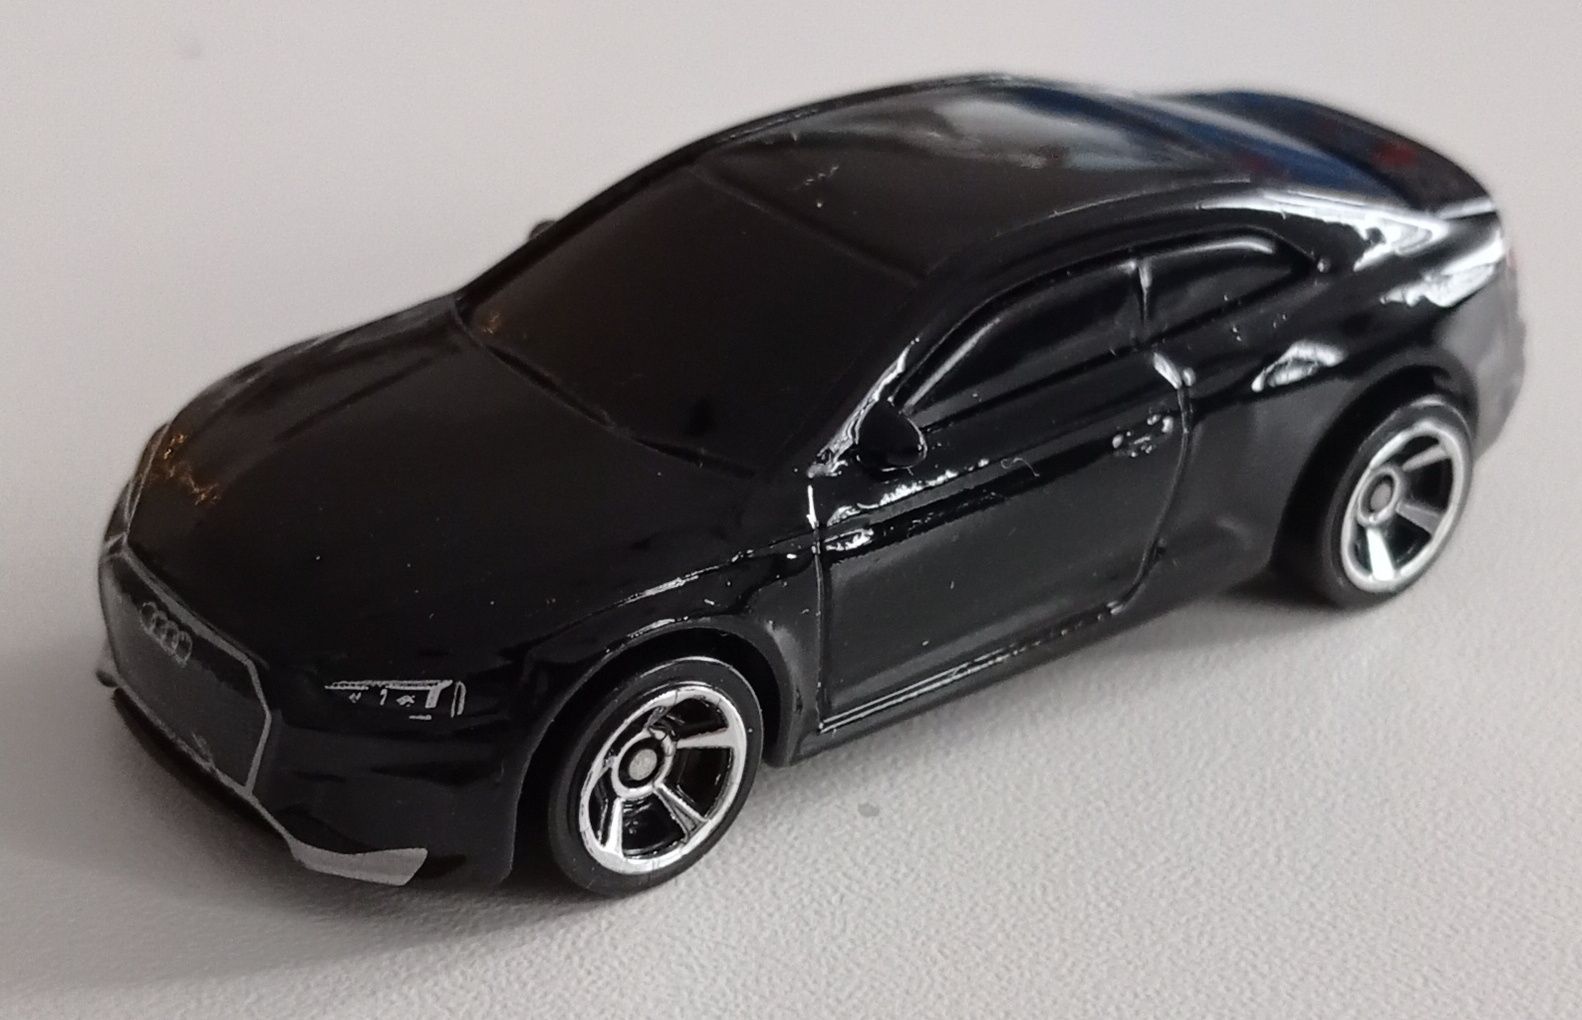 Hot Wheels Audi RS 5 Coupe